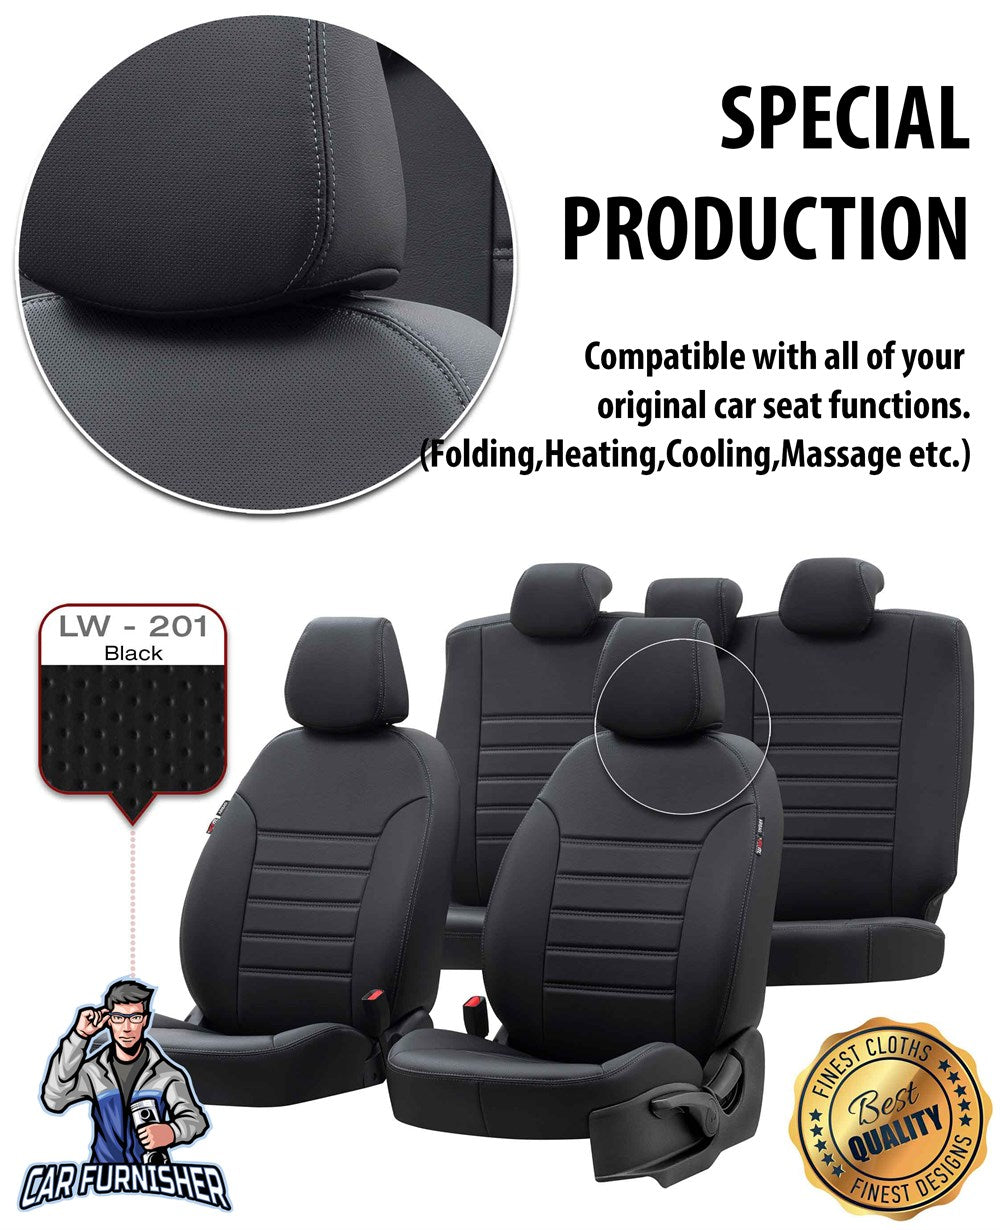 Volkswagen Caddy Seat Cover Istanbul Leather Design Black Leather